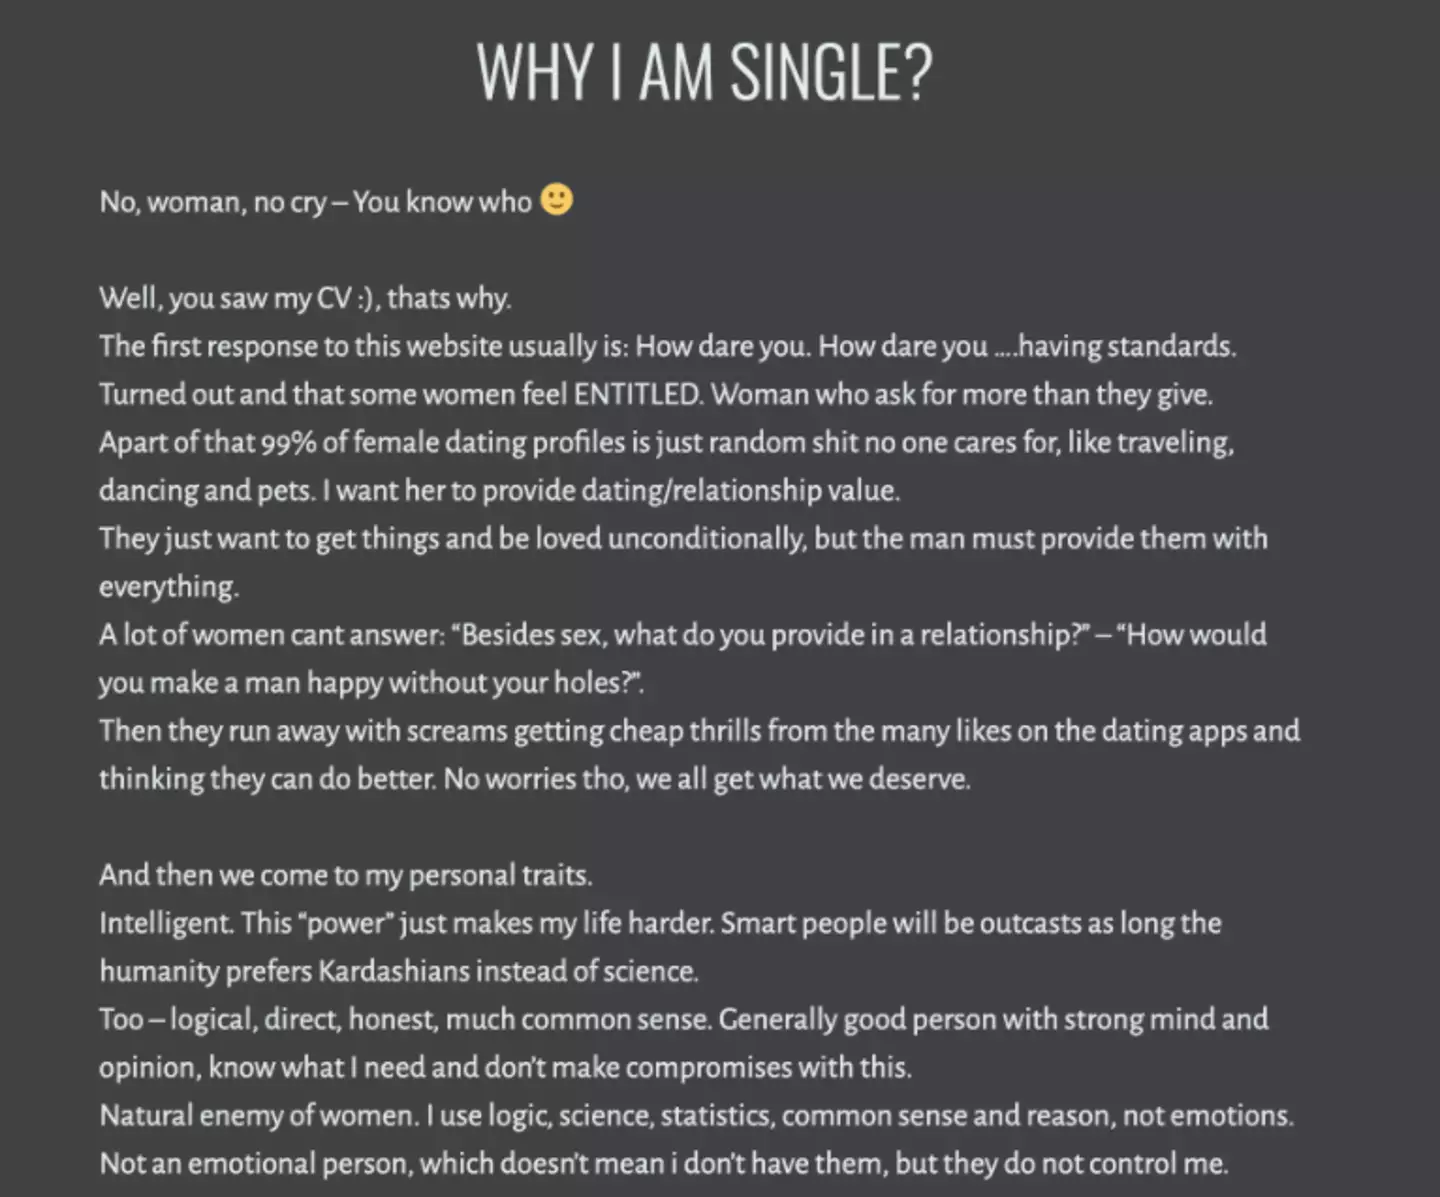 This charmer wants a 'female' he can connect with on a deeper level (